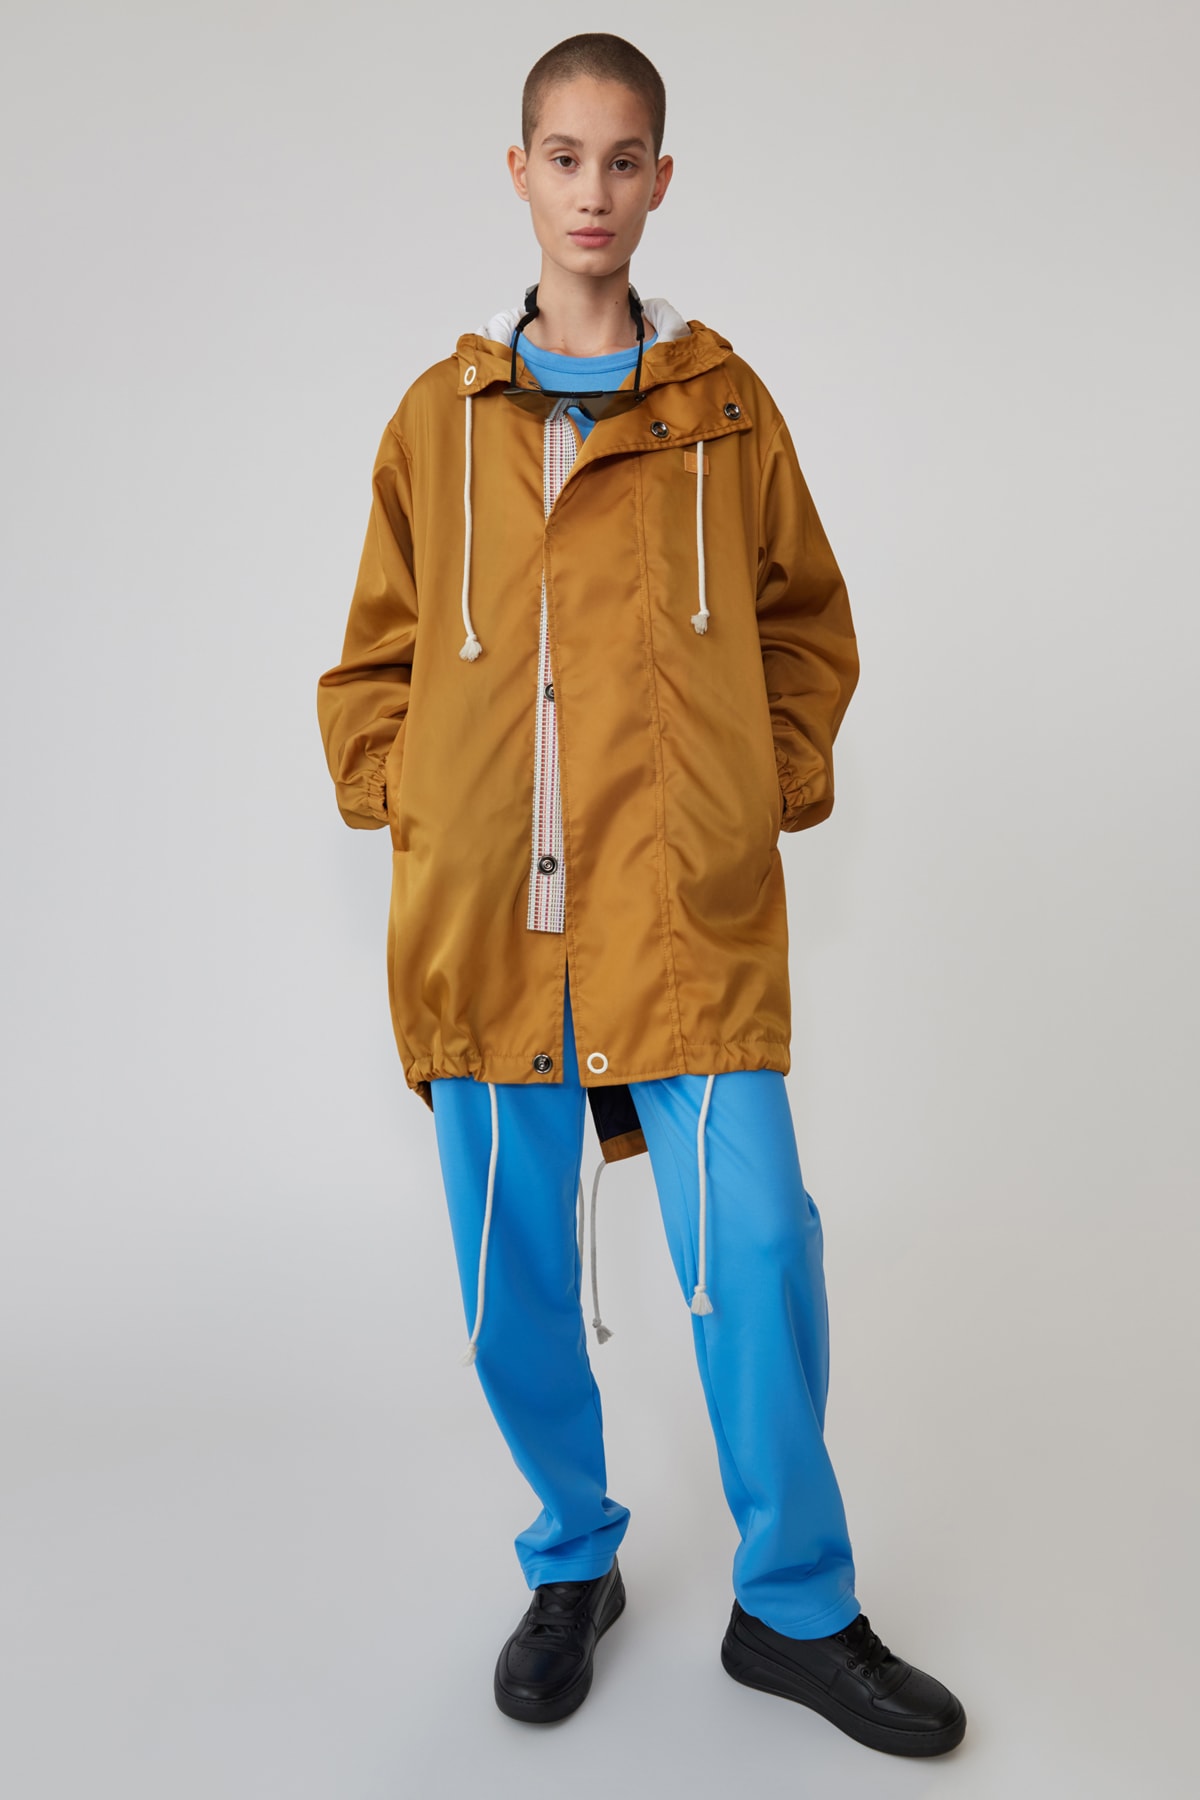 Acne Studios Spring/Summer 2019 Face Collection Hooded Jacket Brown Pants Blue